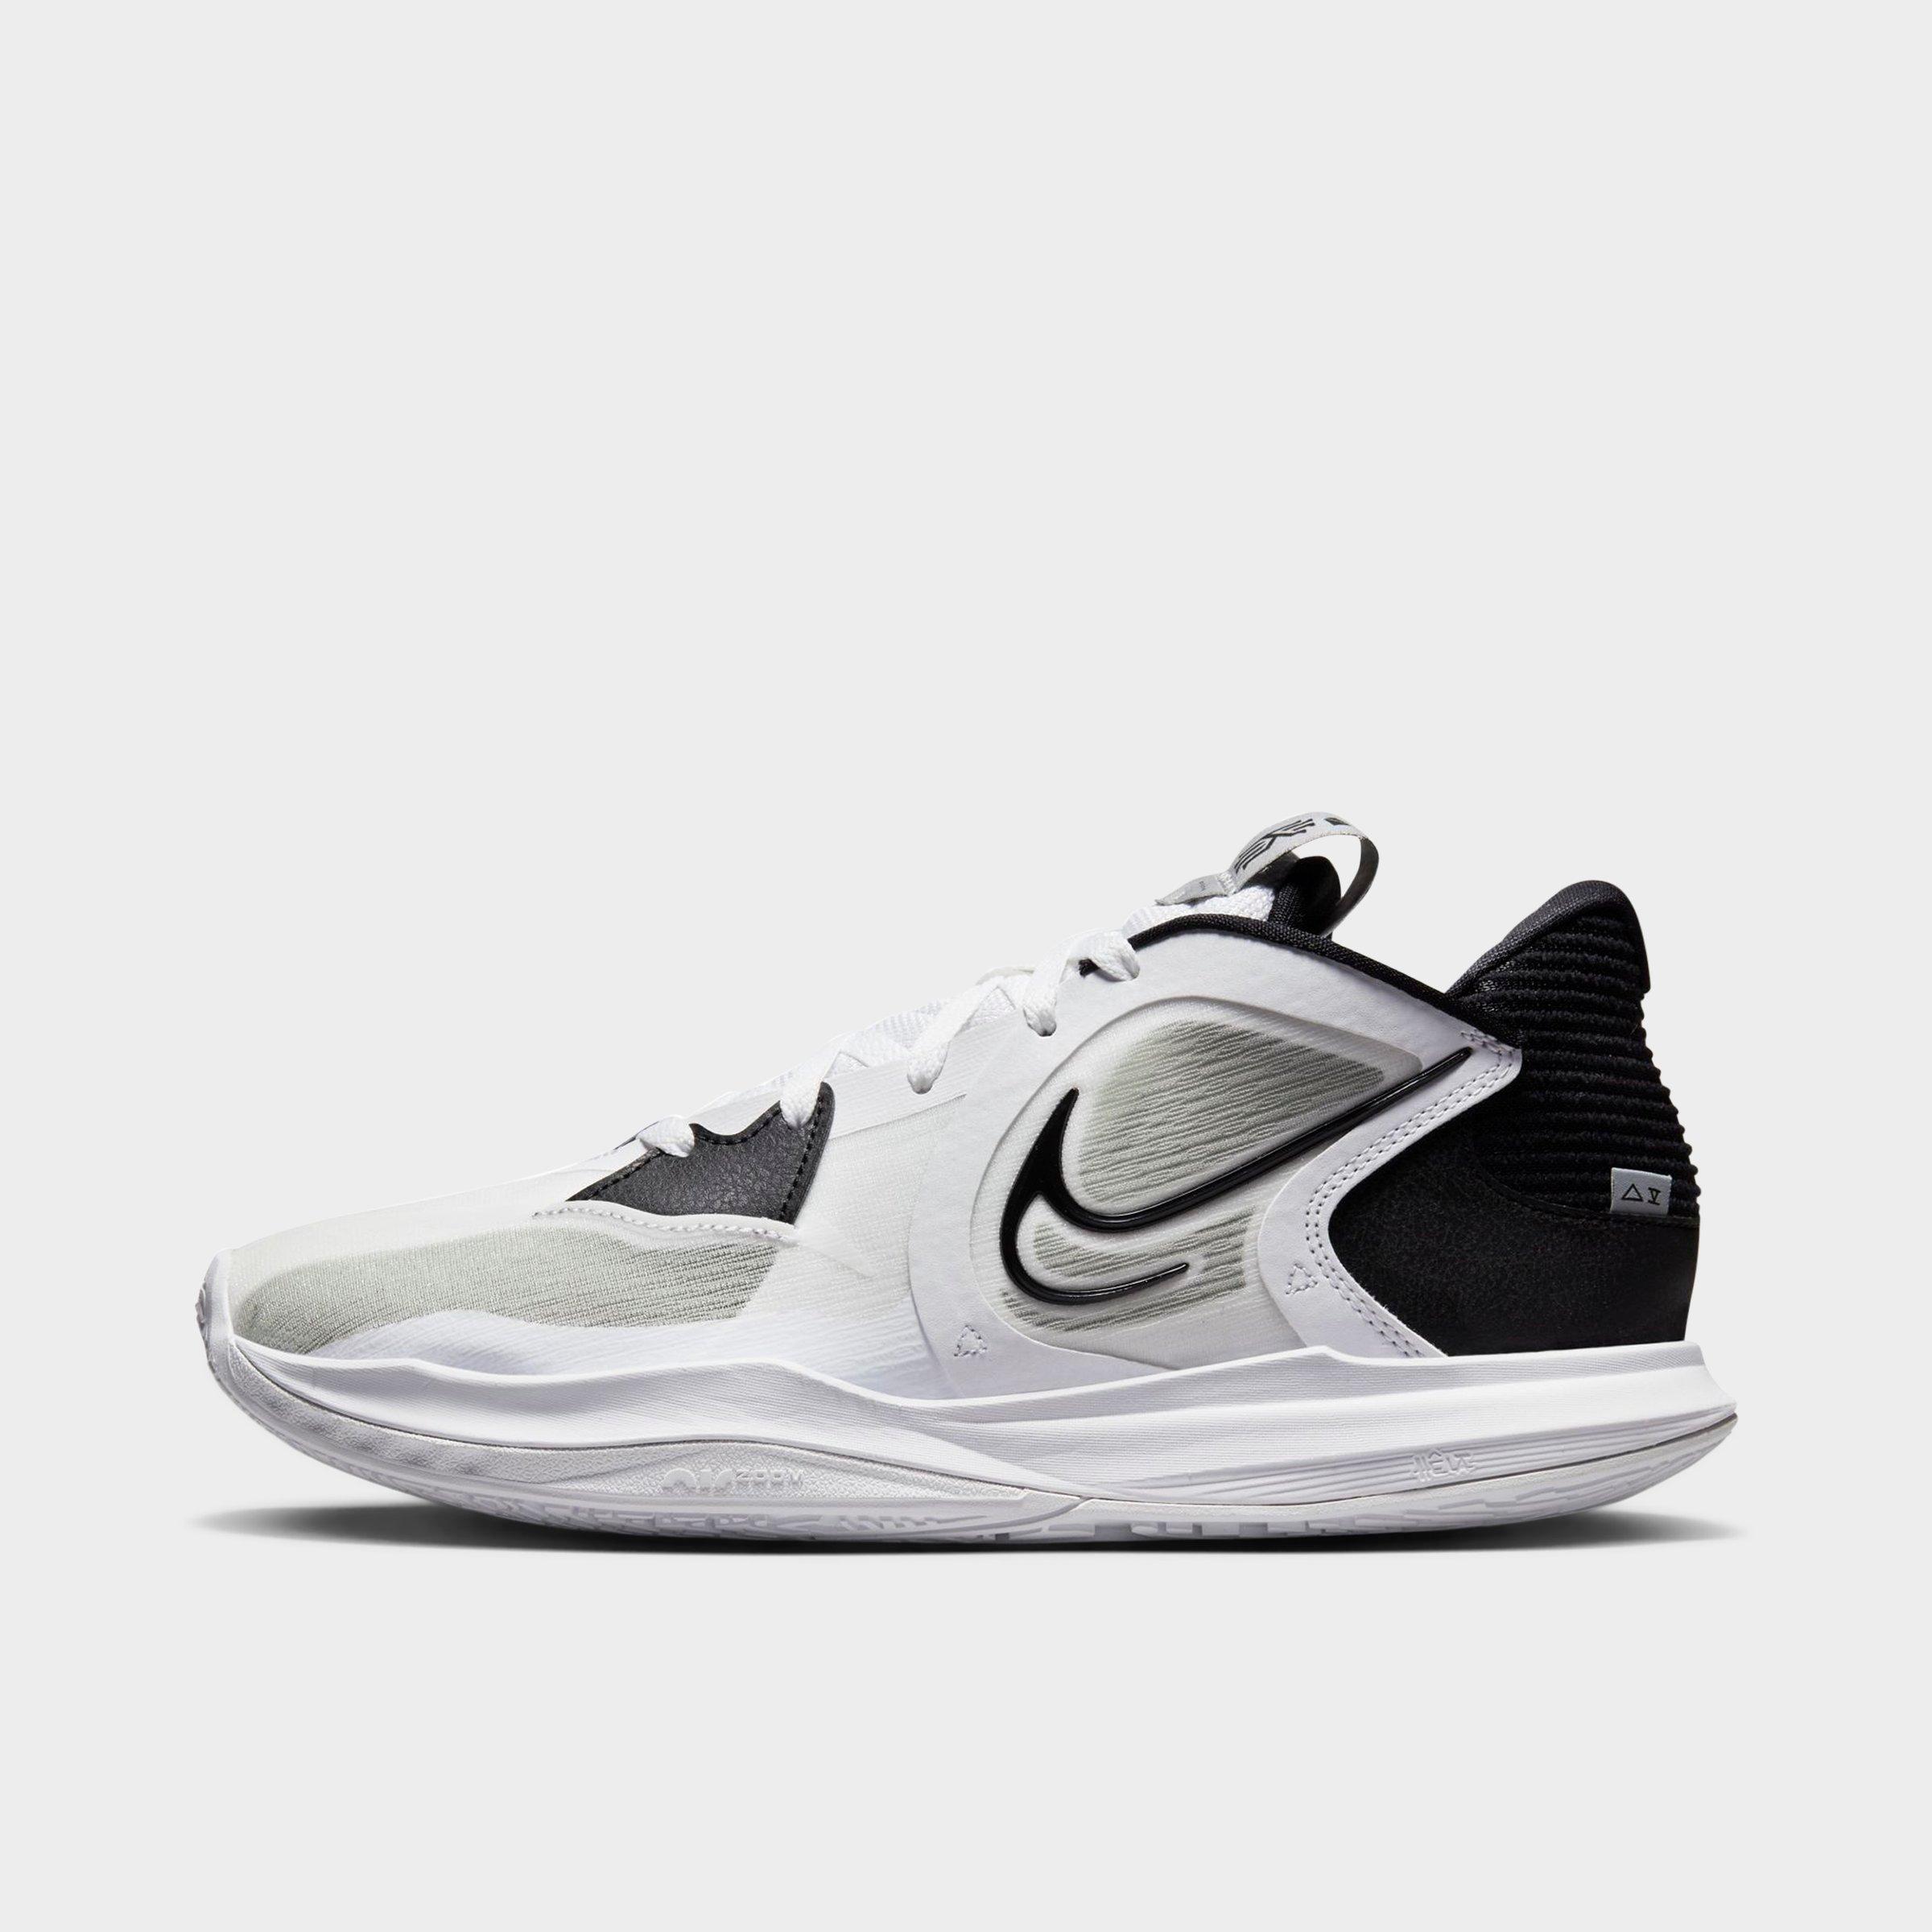 Nike Kyrie 5 Low Basketball Shoes In White/black/white/wolf Grey